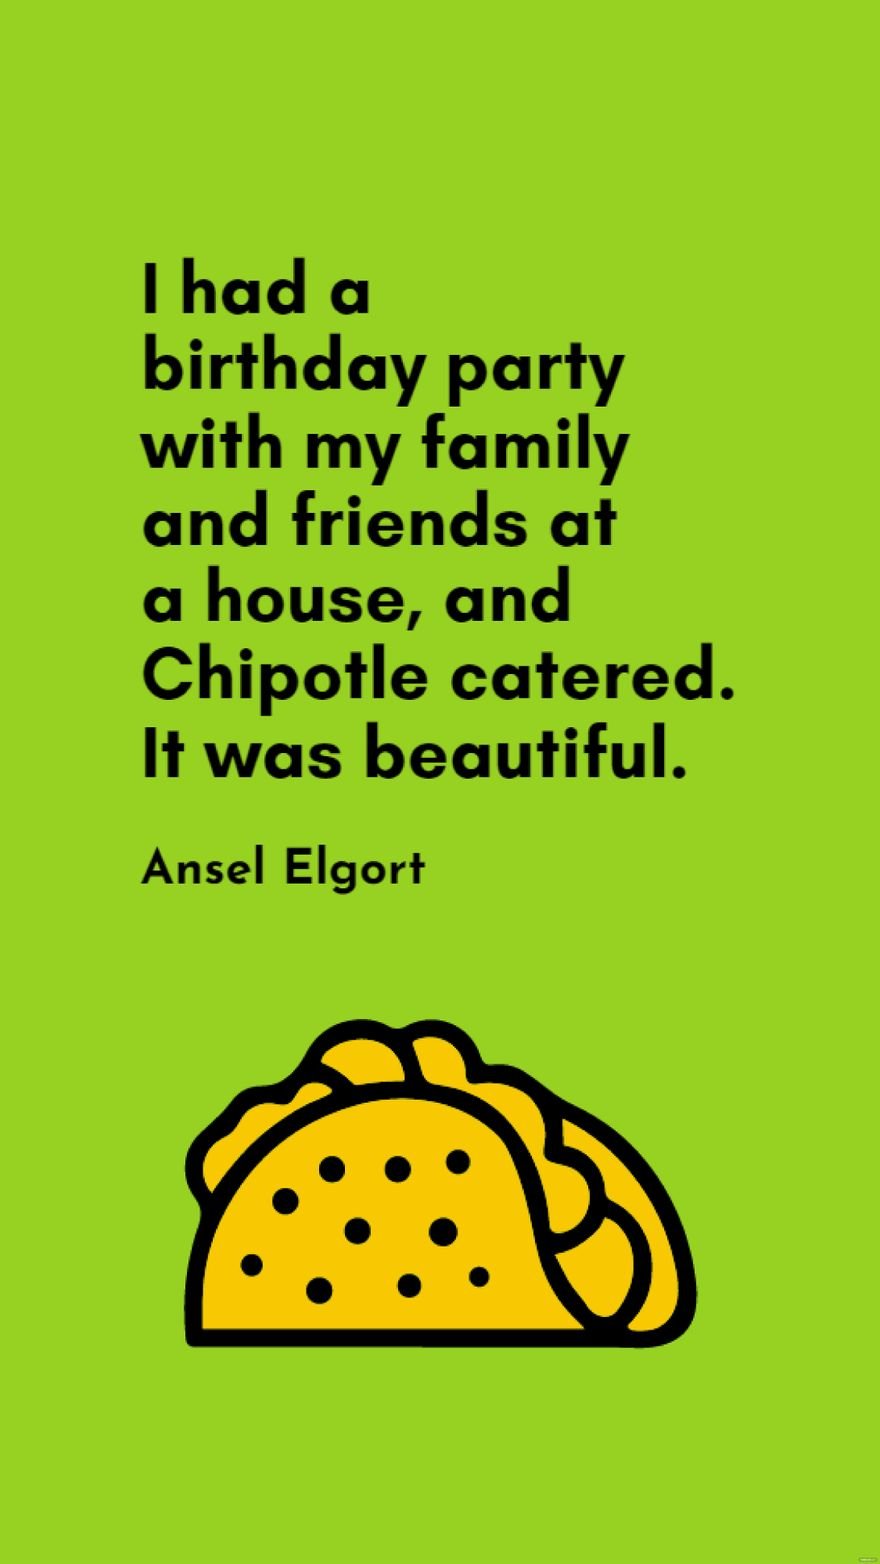 Free Ansel Elgort - I had a birthday party with my family and friends at a house, and Chipotle catered. It was beautiful.